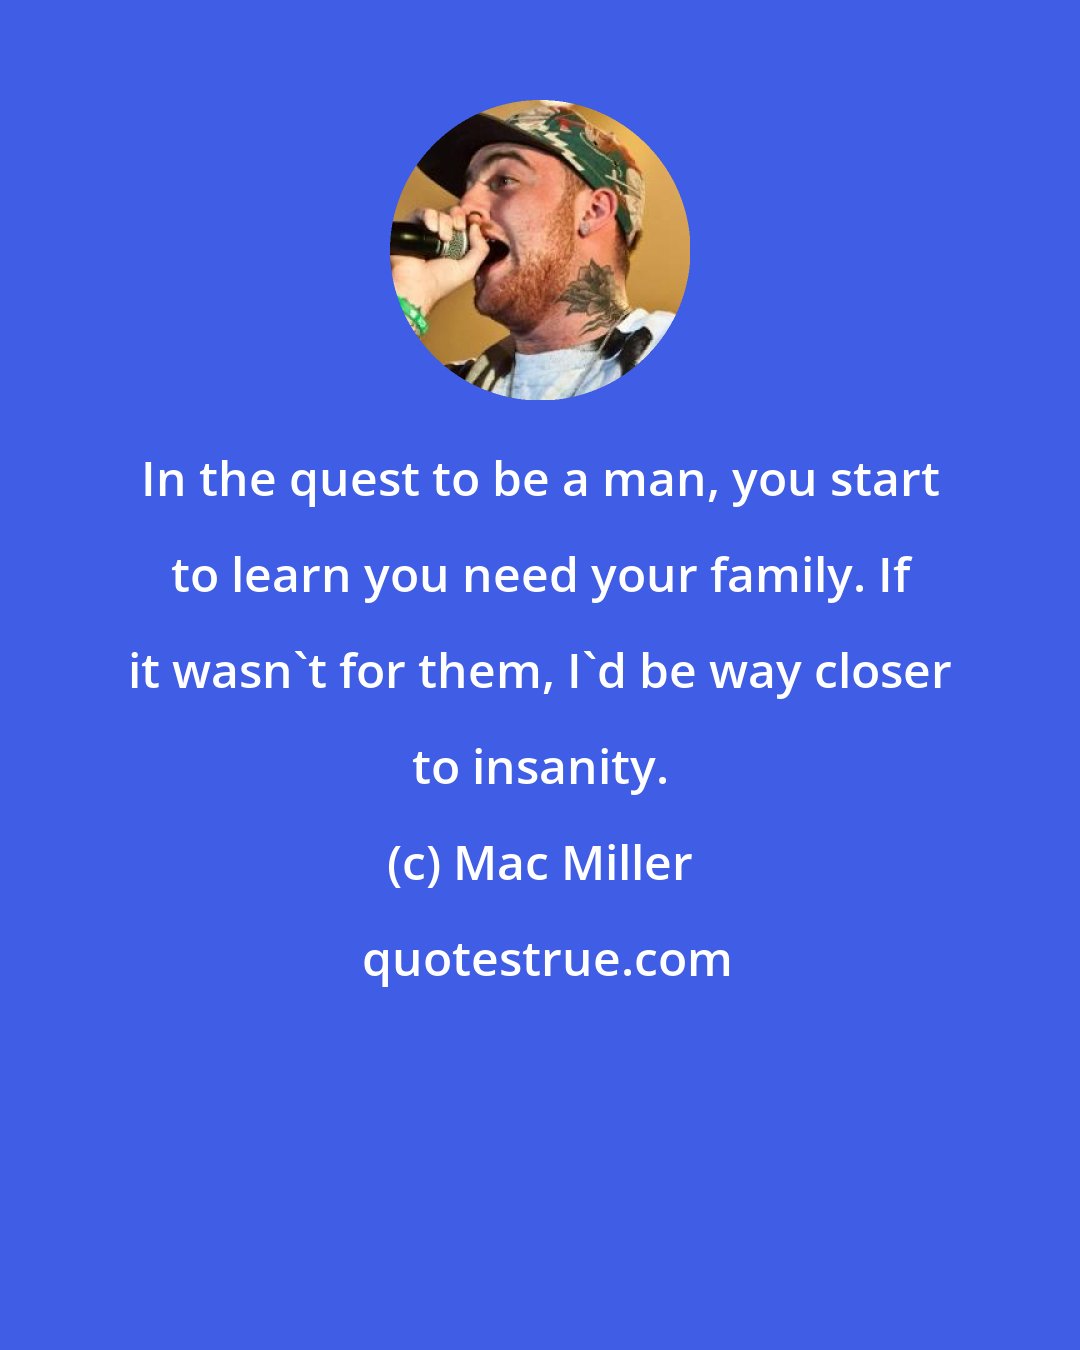 Mac Miller: In the quest to be a man, you start to learn you need your family. If it wasn't for them, I'd be way closer to insanity.